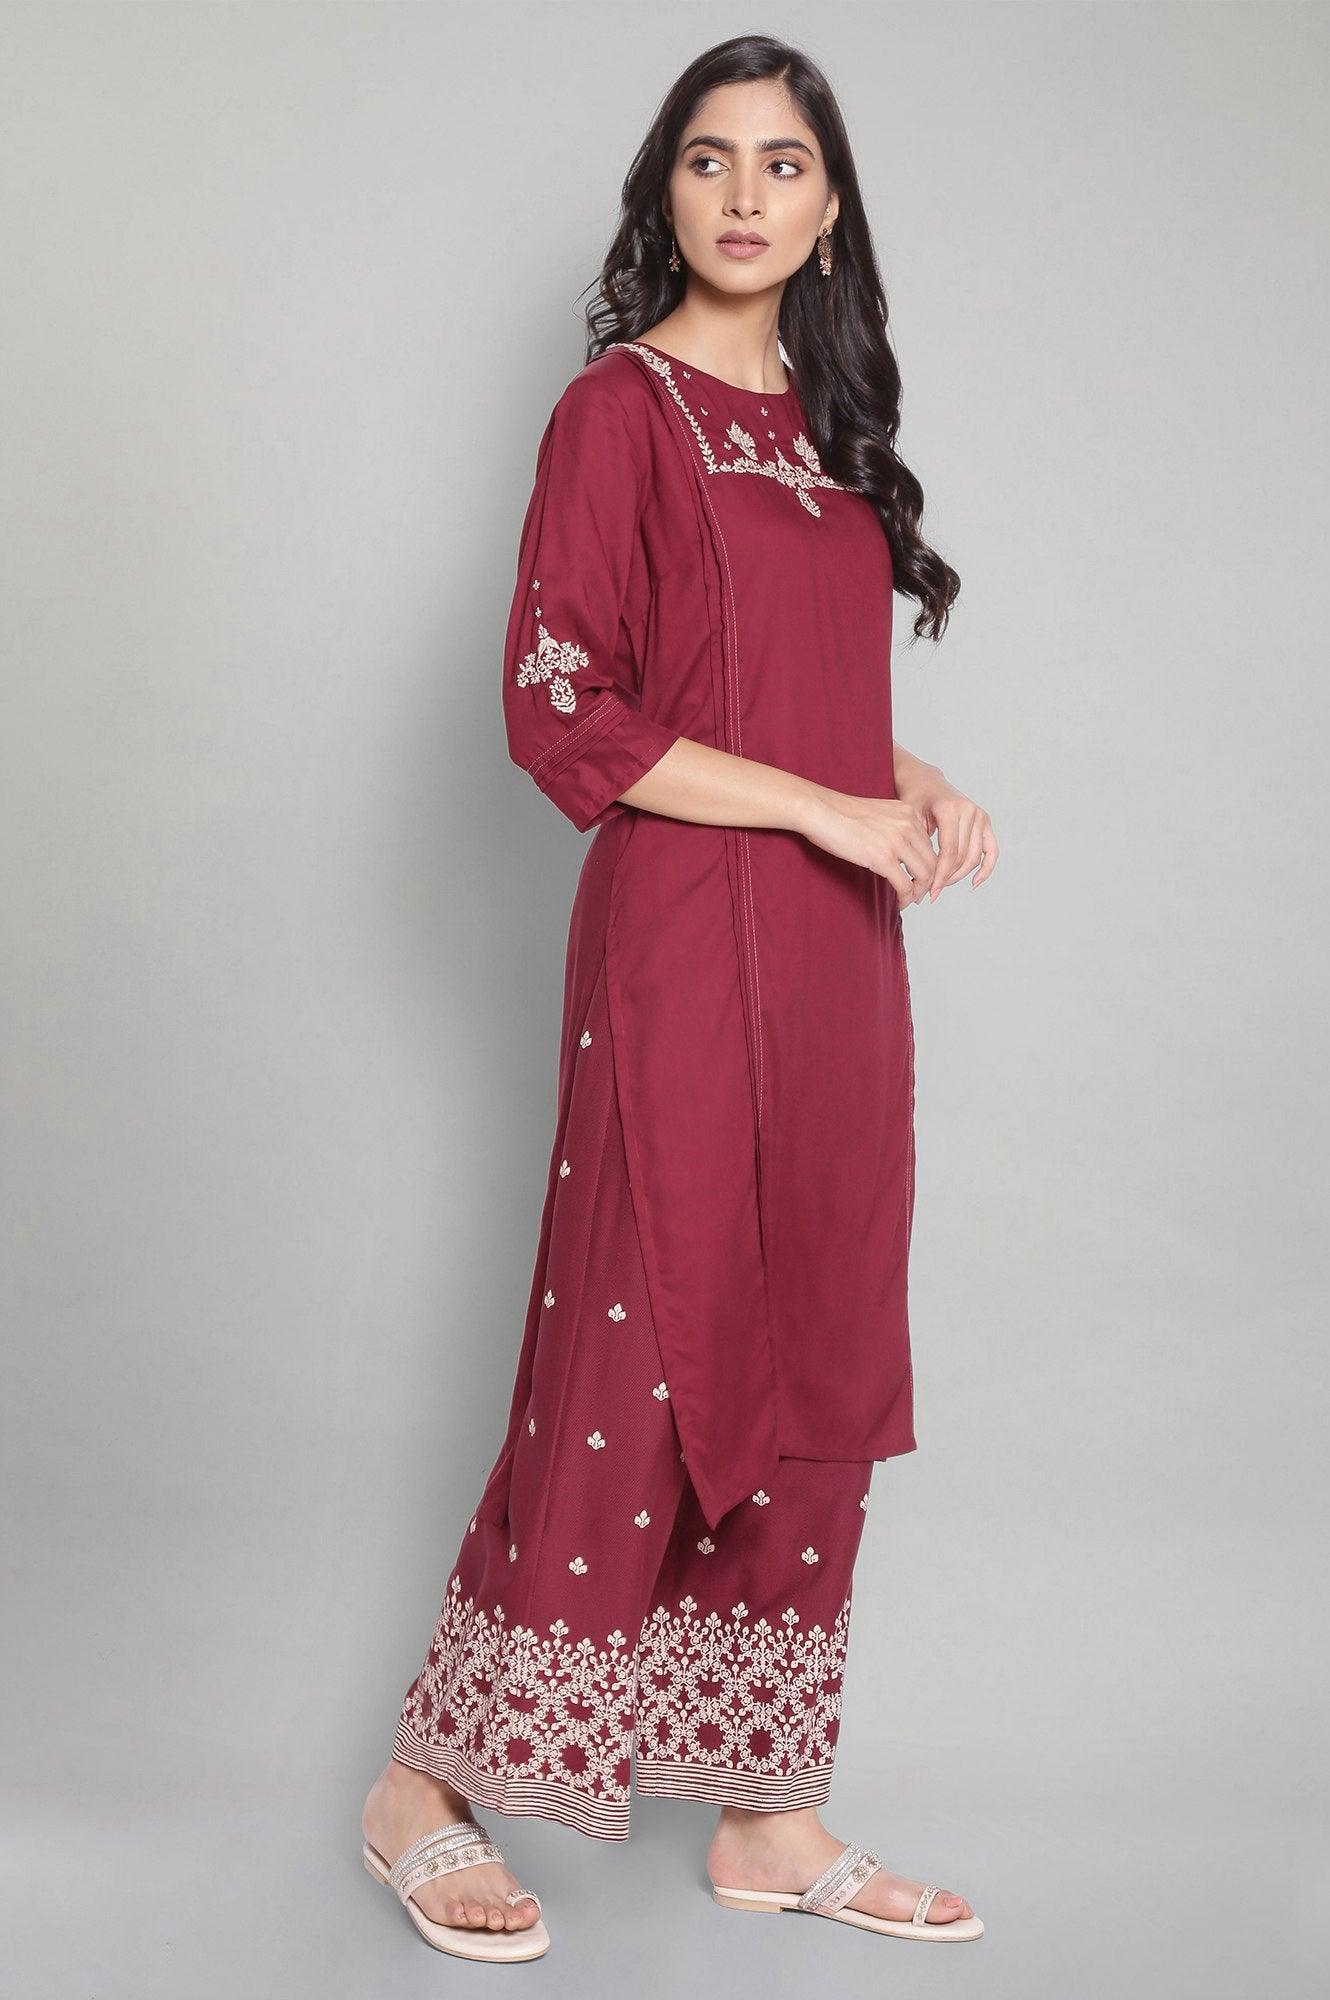 Maroon Solid kurta with Embroidery - wforwoman